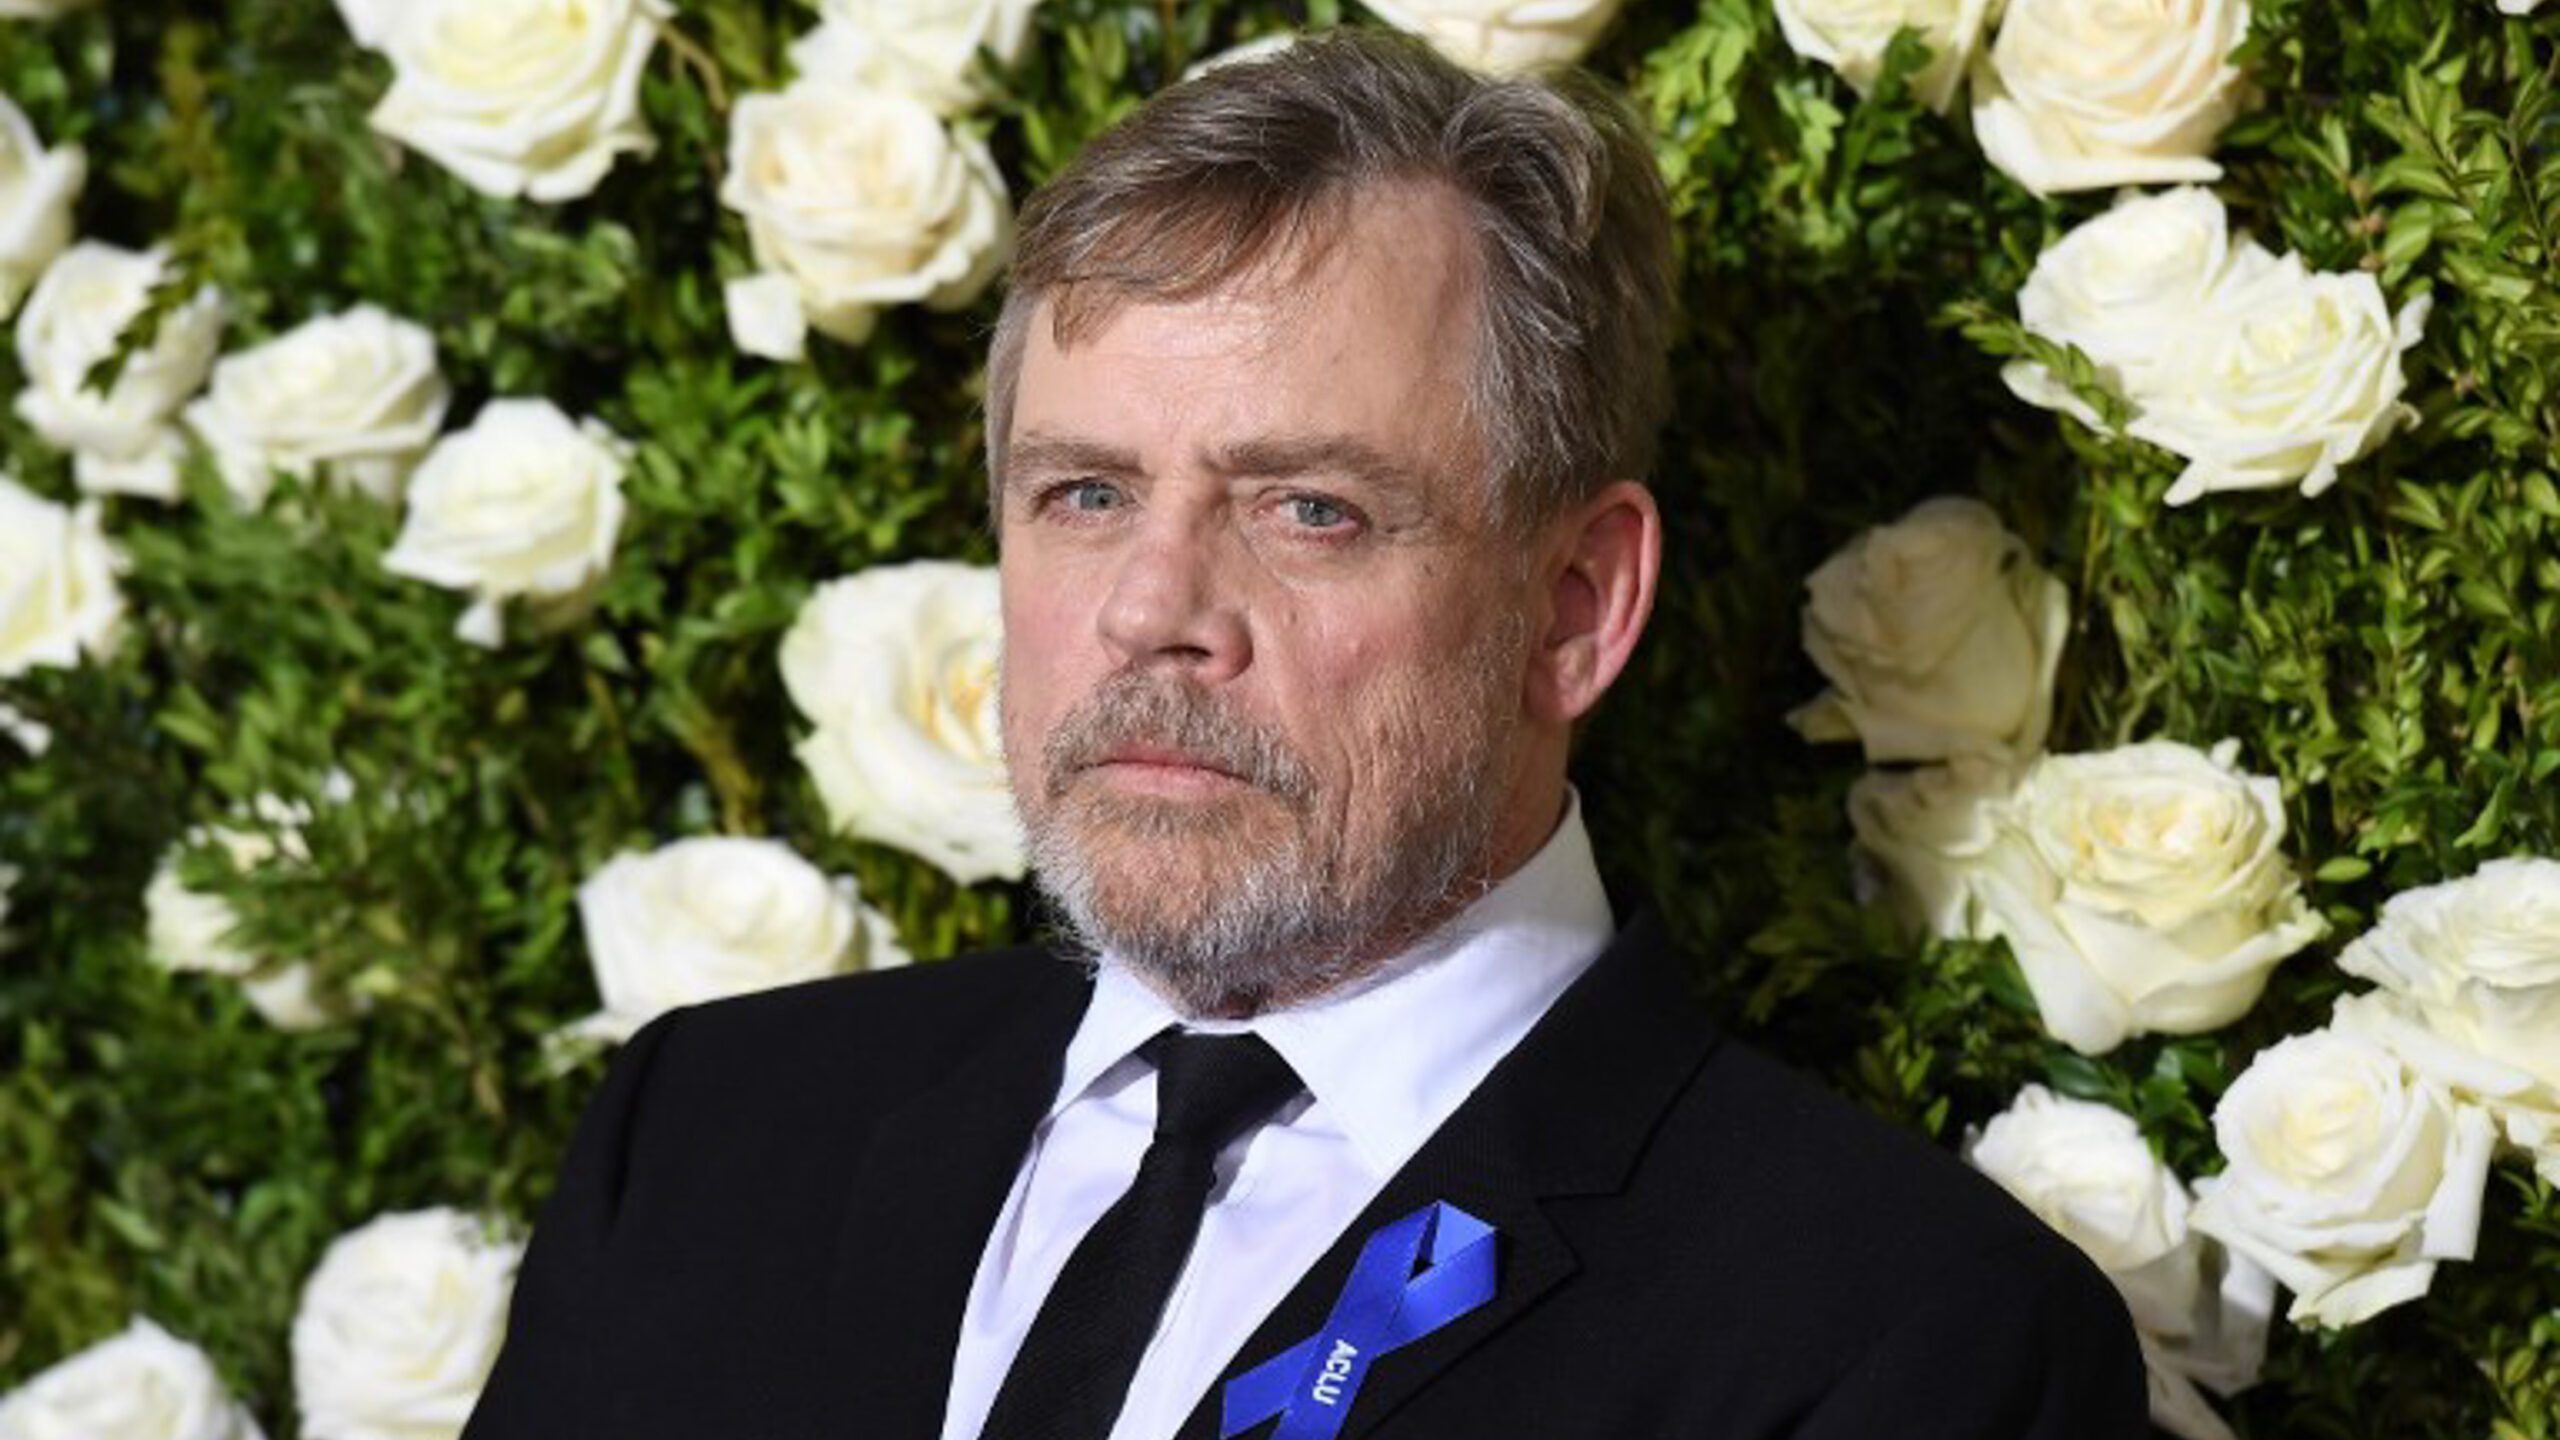 WATCH: Mark Hamill remembers Carrie Fisher at D23 Expo 2017